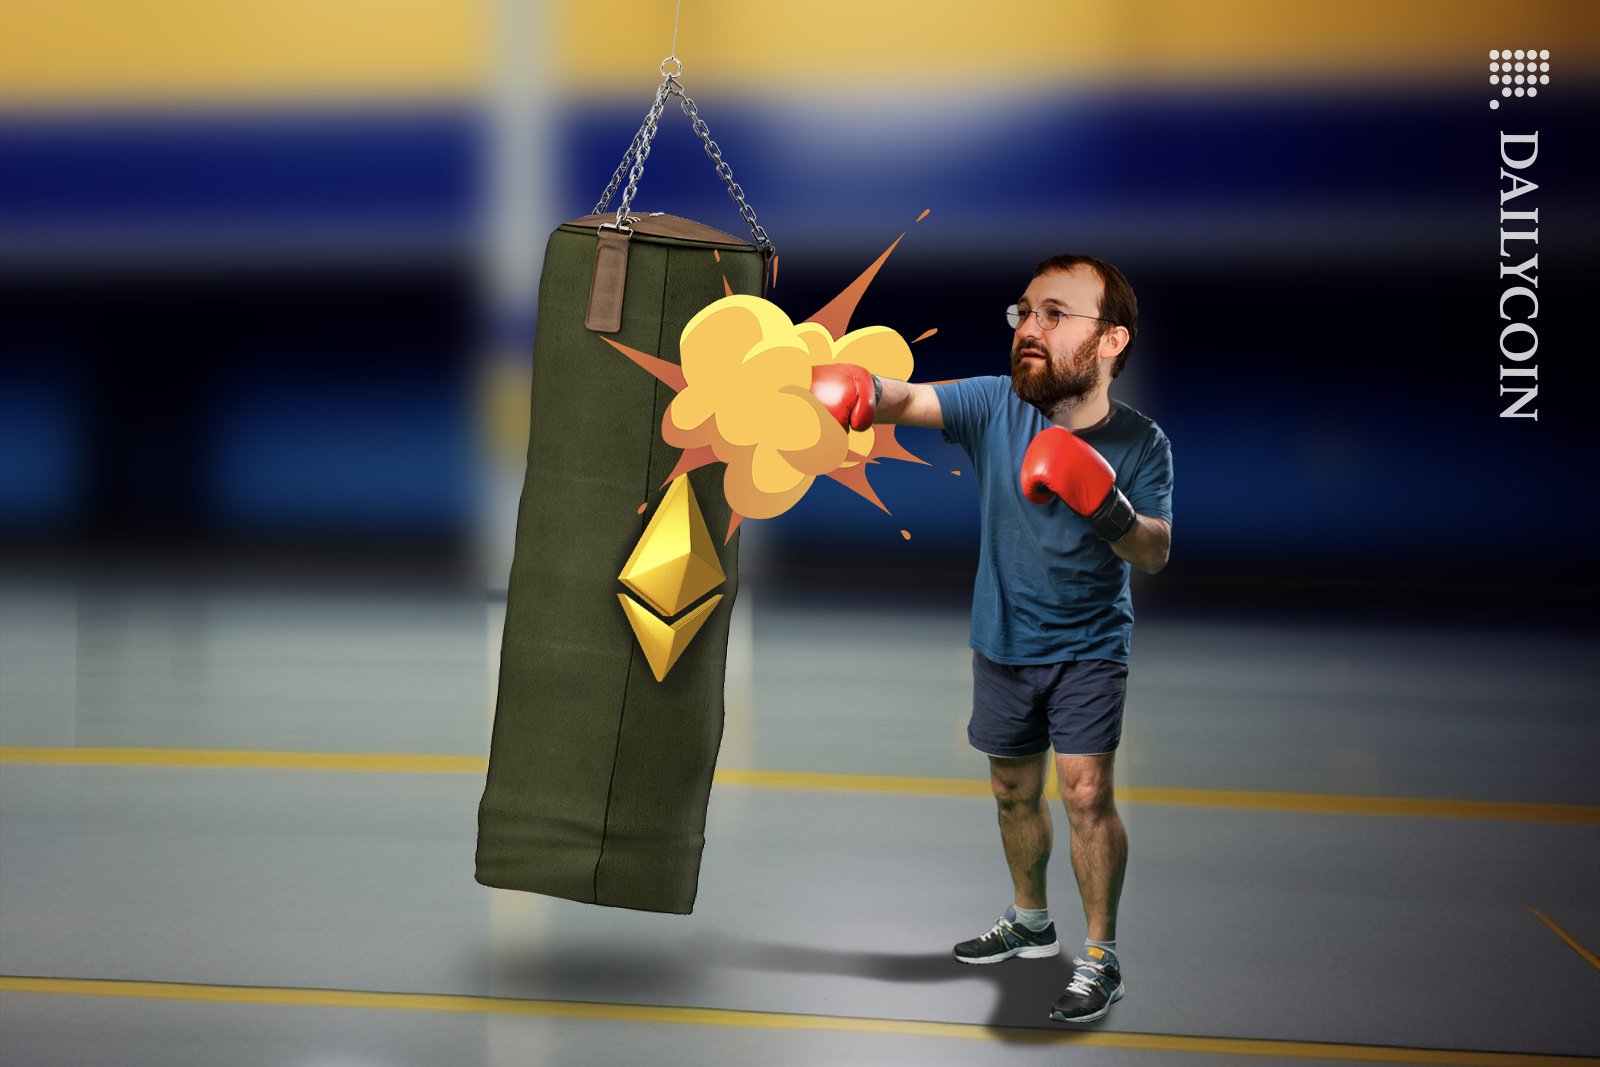 Charles Hoskinson hitting a punching bag with an Ethereum logo on it in an empty gym.